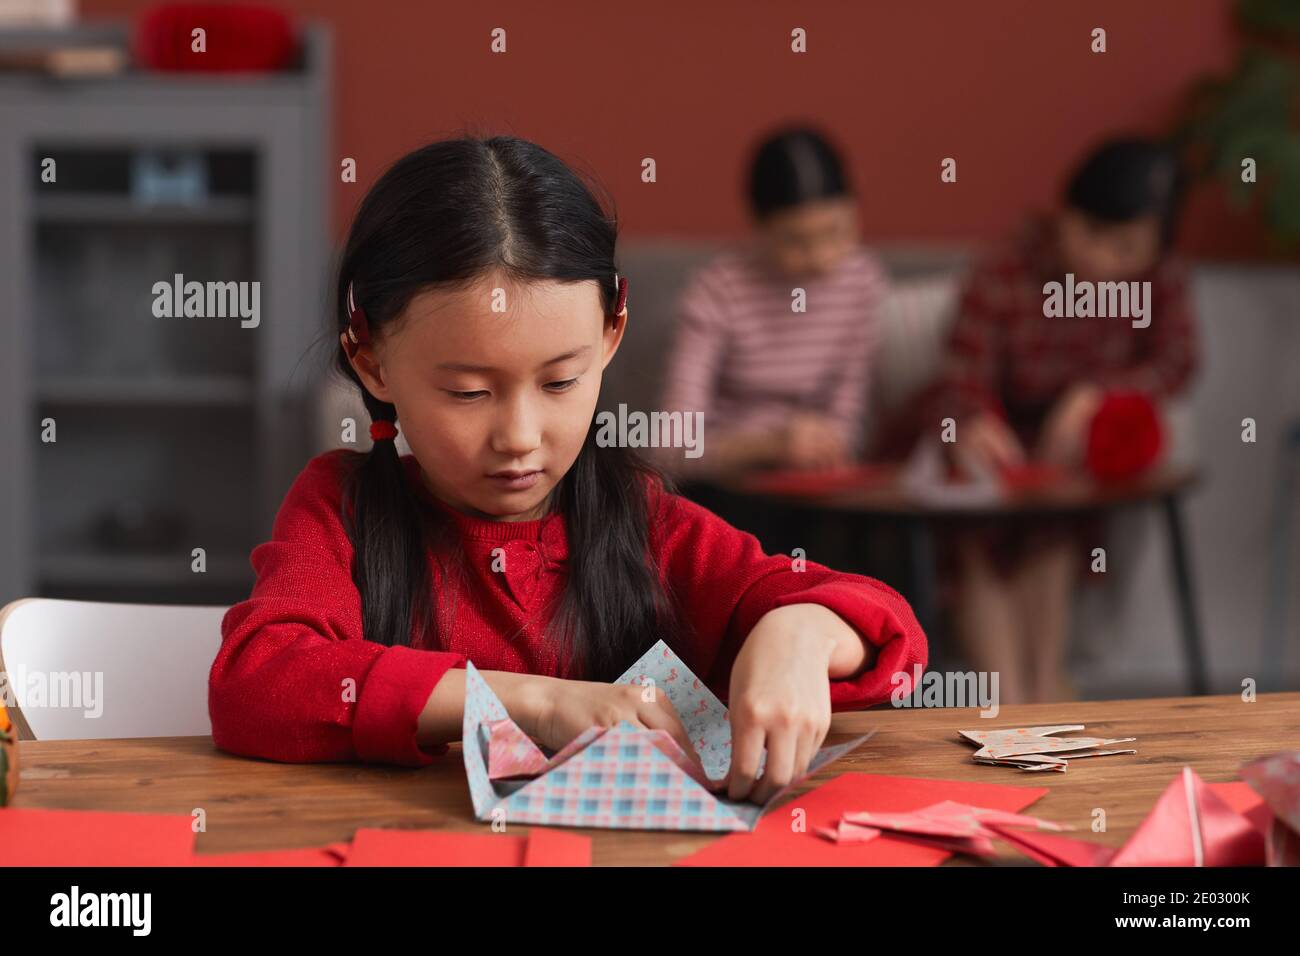 Cute little Asian girl wearing red clothes sitting at wooden table in living room busy making paper craft for Lunar New Year decorations Stock Photo